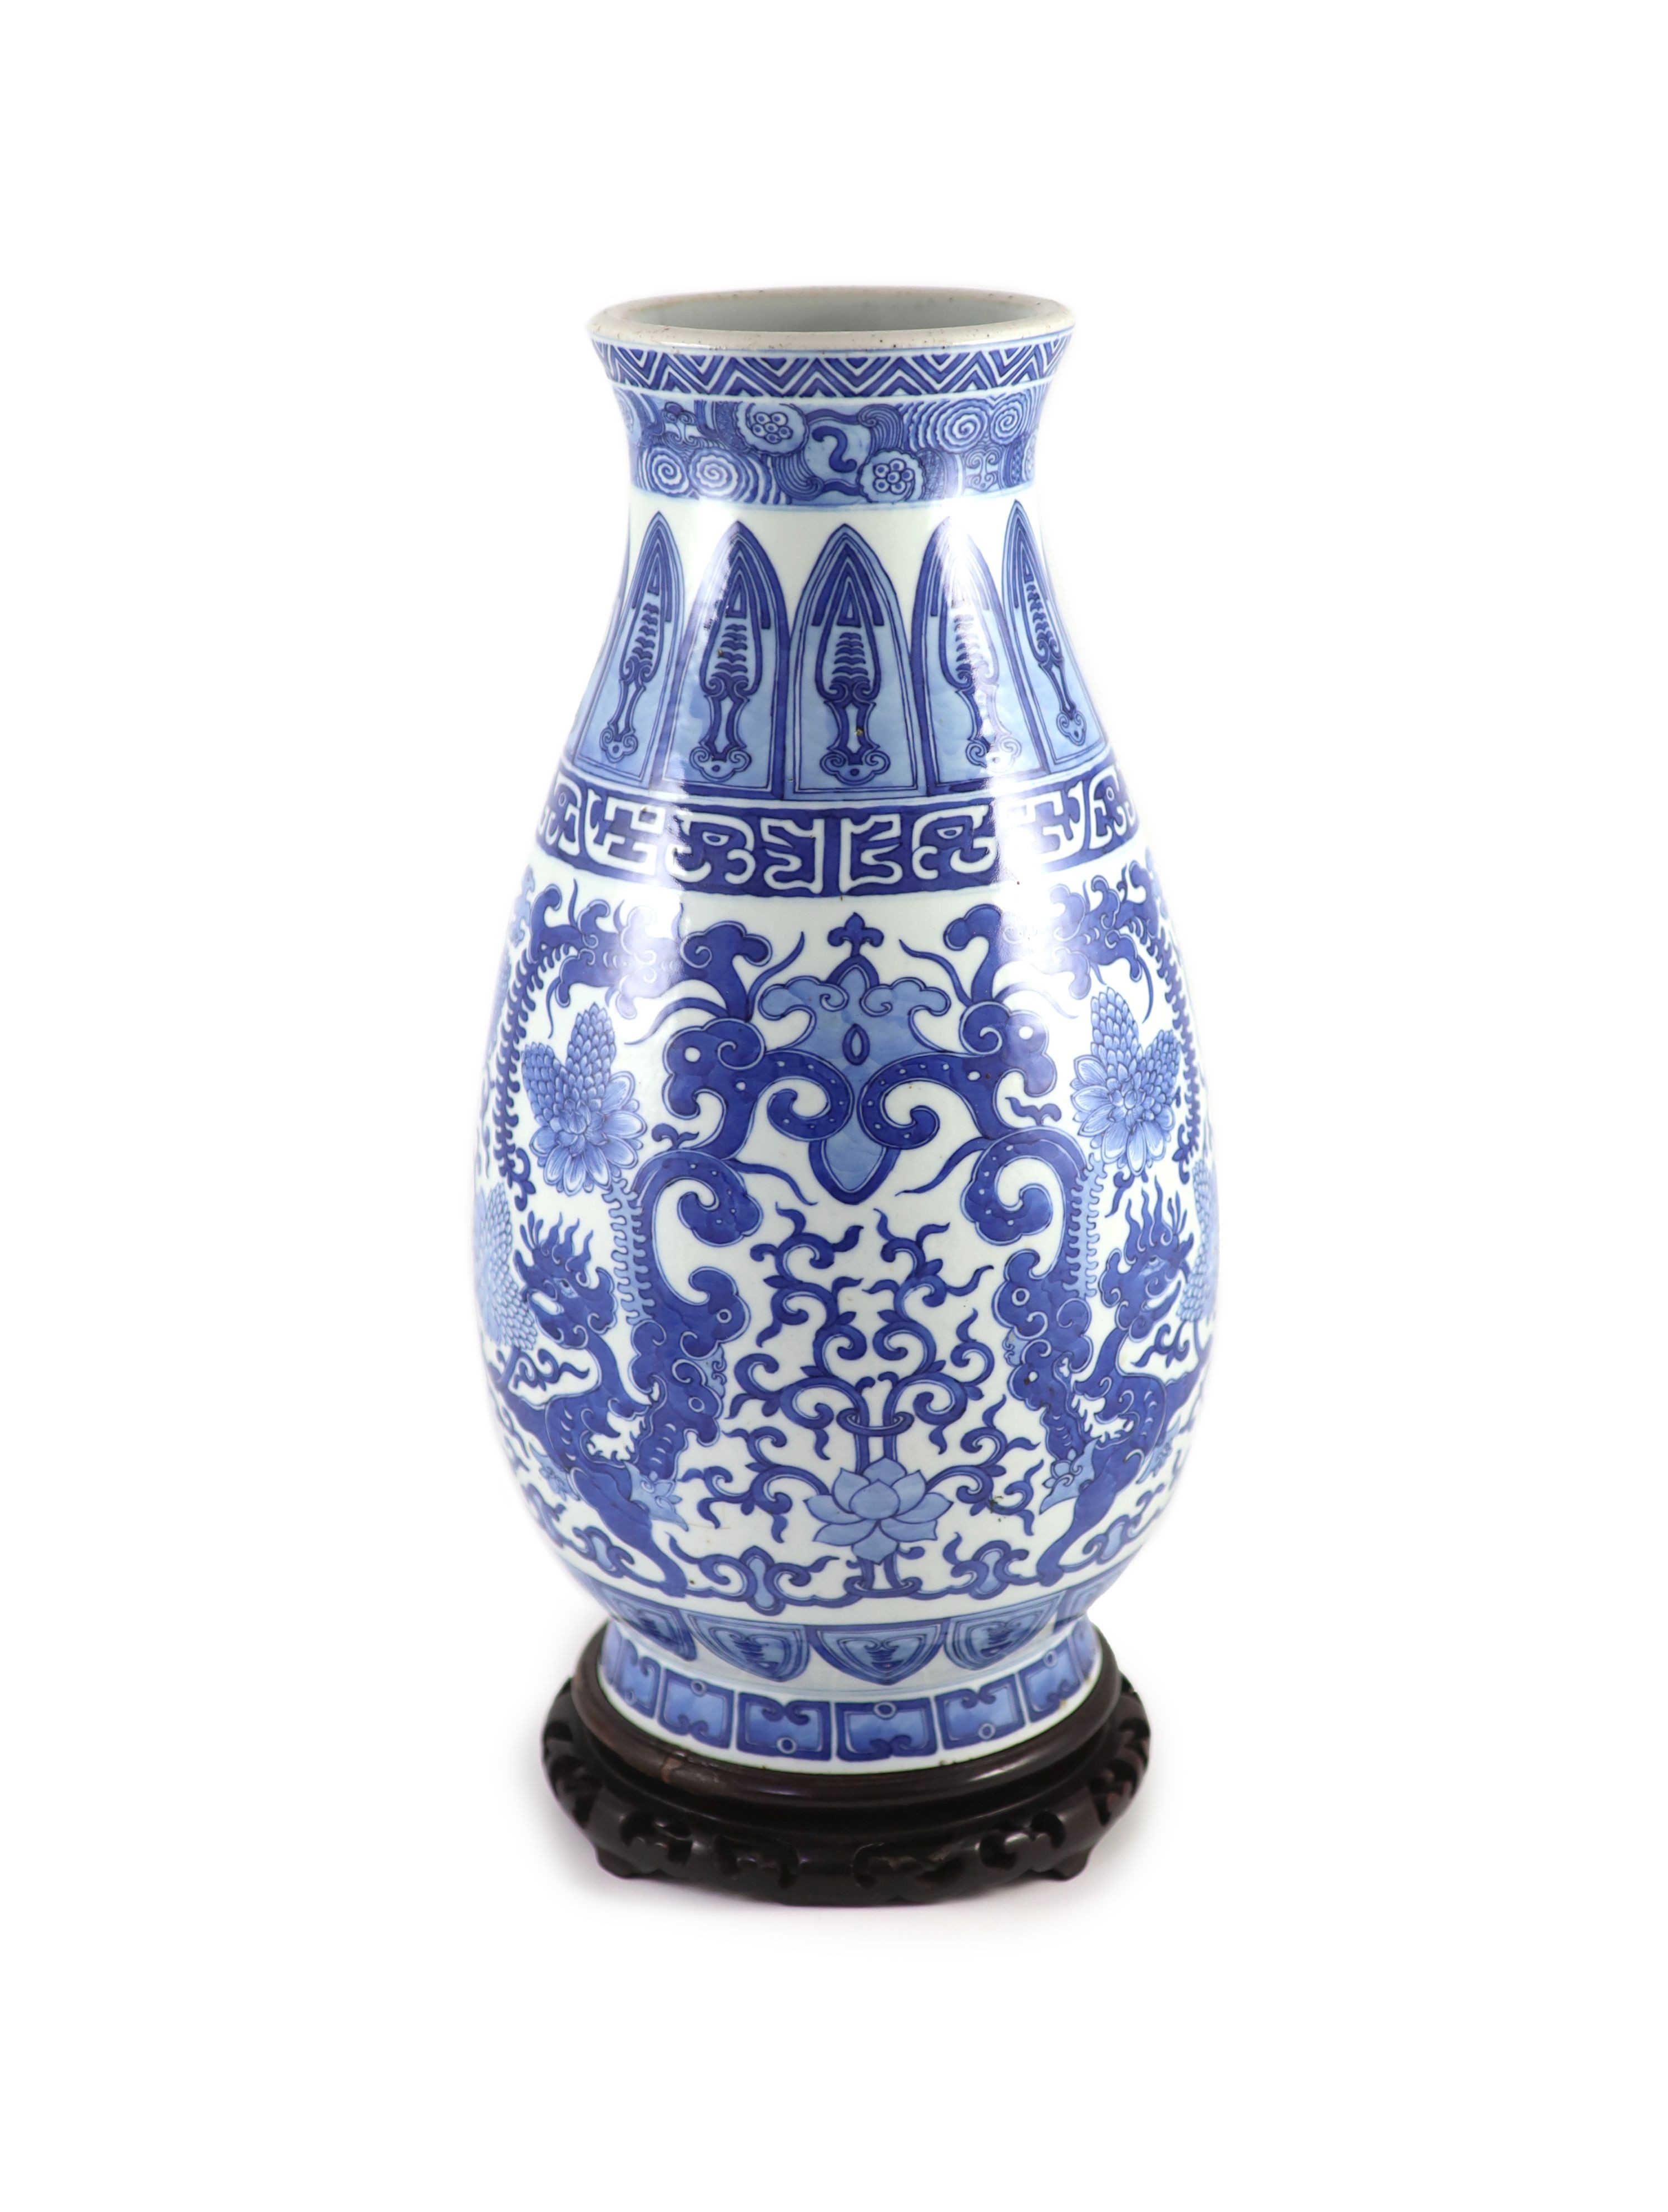 A Chinese archaistic blue and white pear-shaped vase, Qianlong mark but 19th century,finely